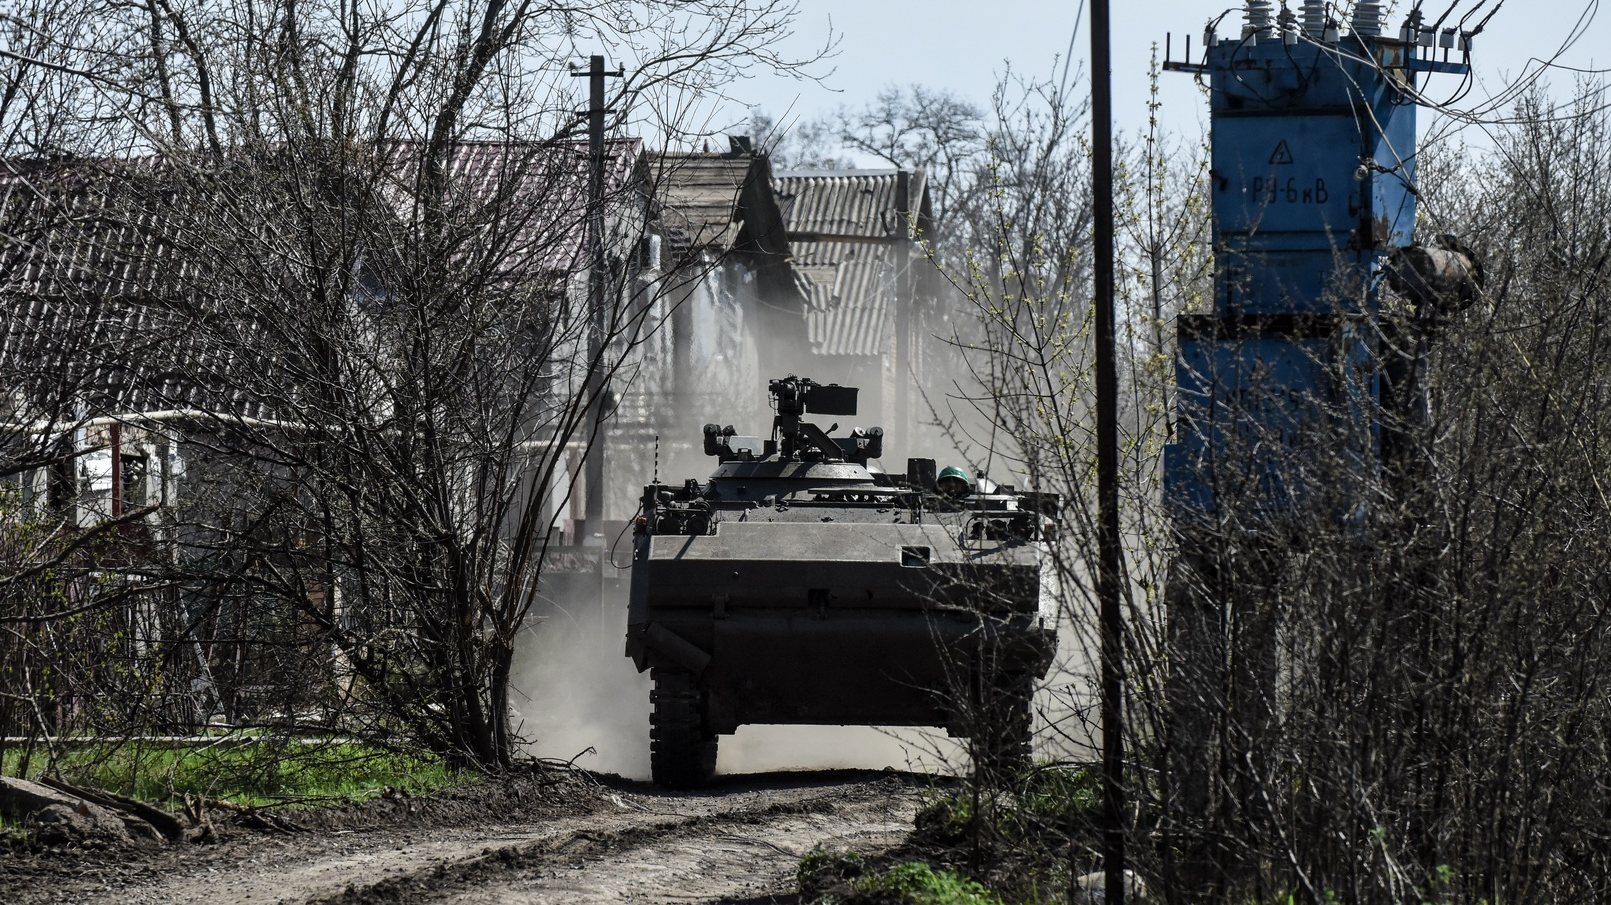 epa10567784 A Ukrainian forces&#039; M113 APC drives at an undisclosed location near Bakhmut, Donetsk region, Ukraine, 10 April 2023. Russian troops entered Ukrainian territory on 24 February 2022, starting a conflict that has provoked destruction and a humanitarian crisis.  EPA/OLEG PETRASYUK